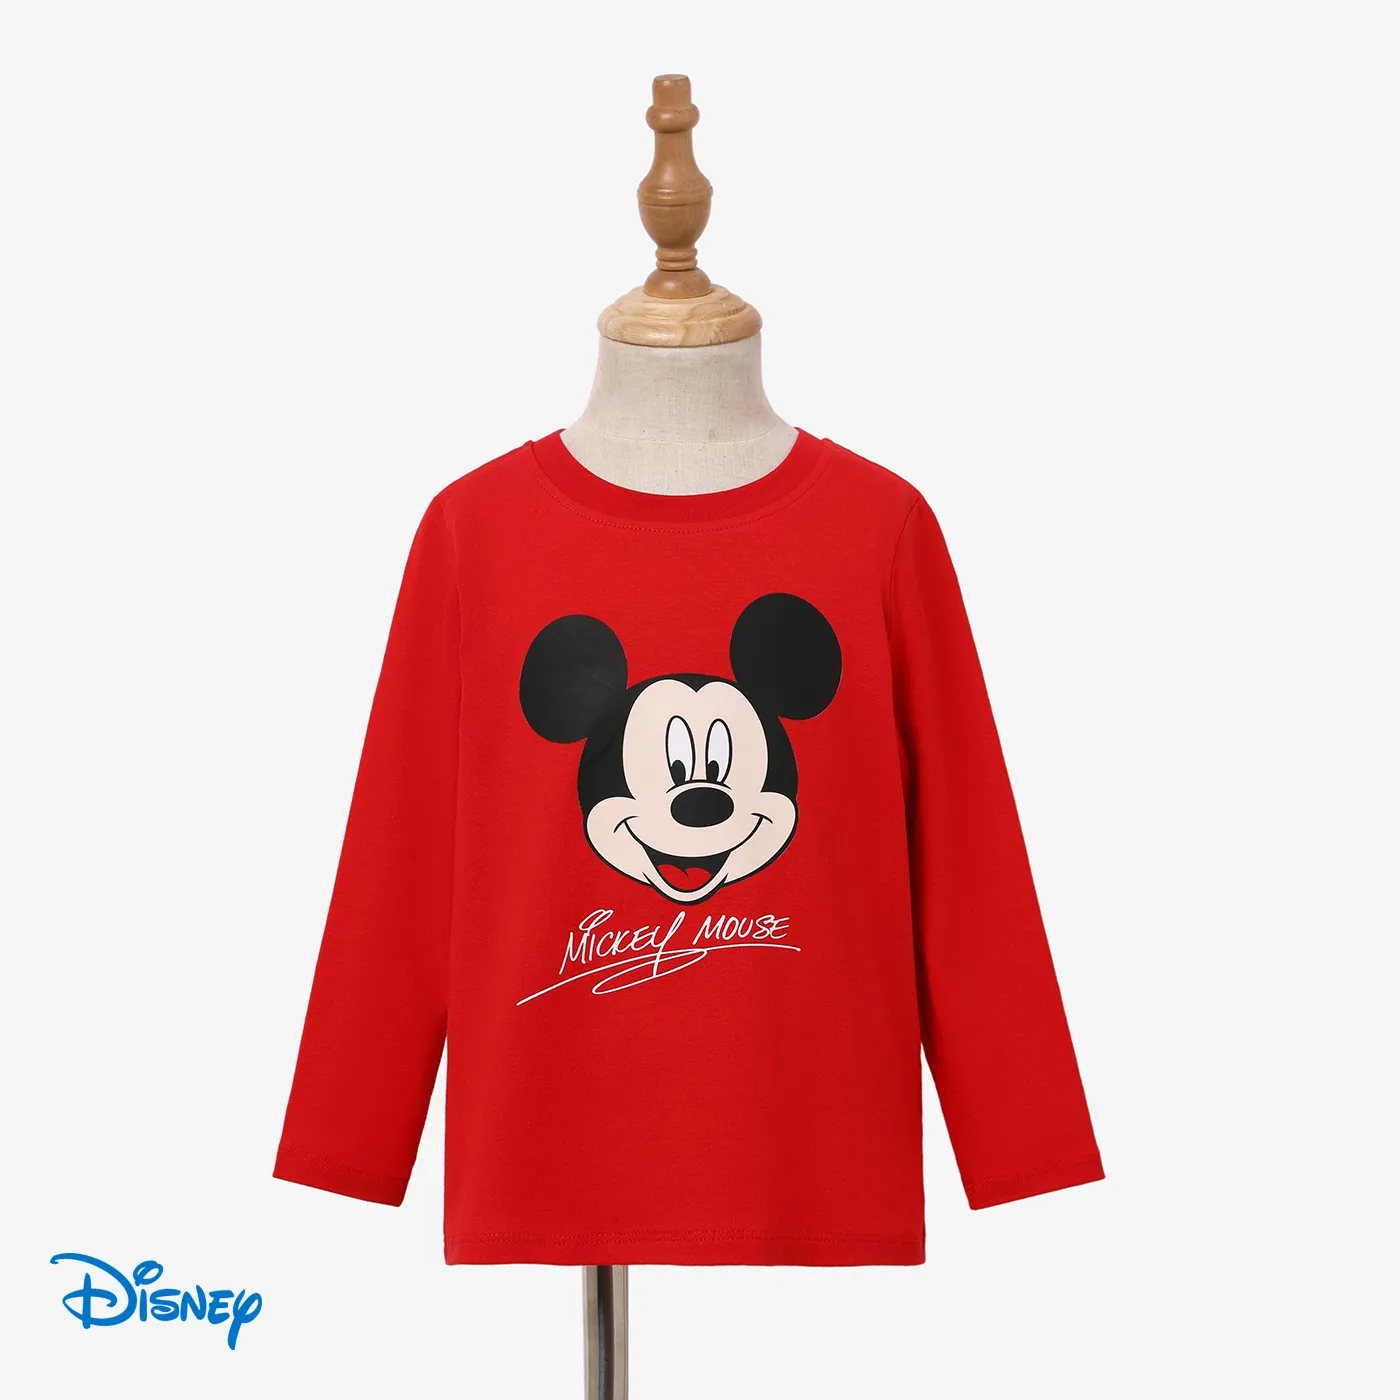 Disney Mickey and Friends Family Matching Character Print Polka Dots Long-sleeve Red Dress or Cotton